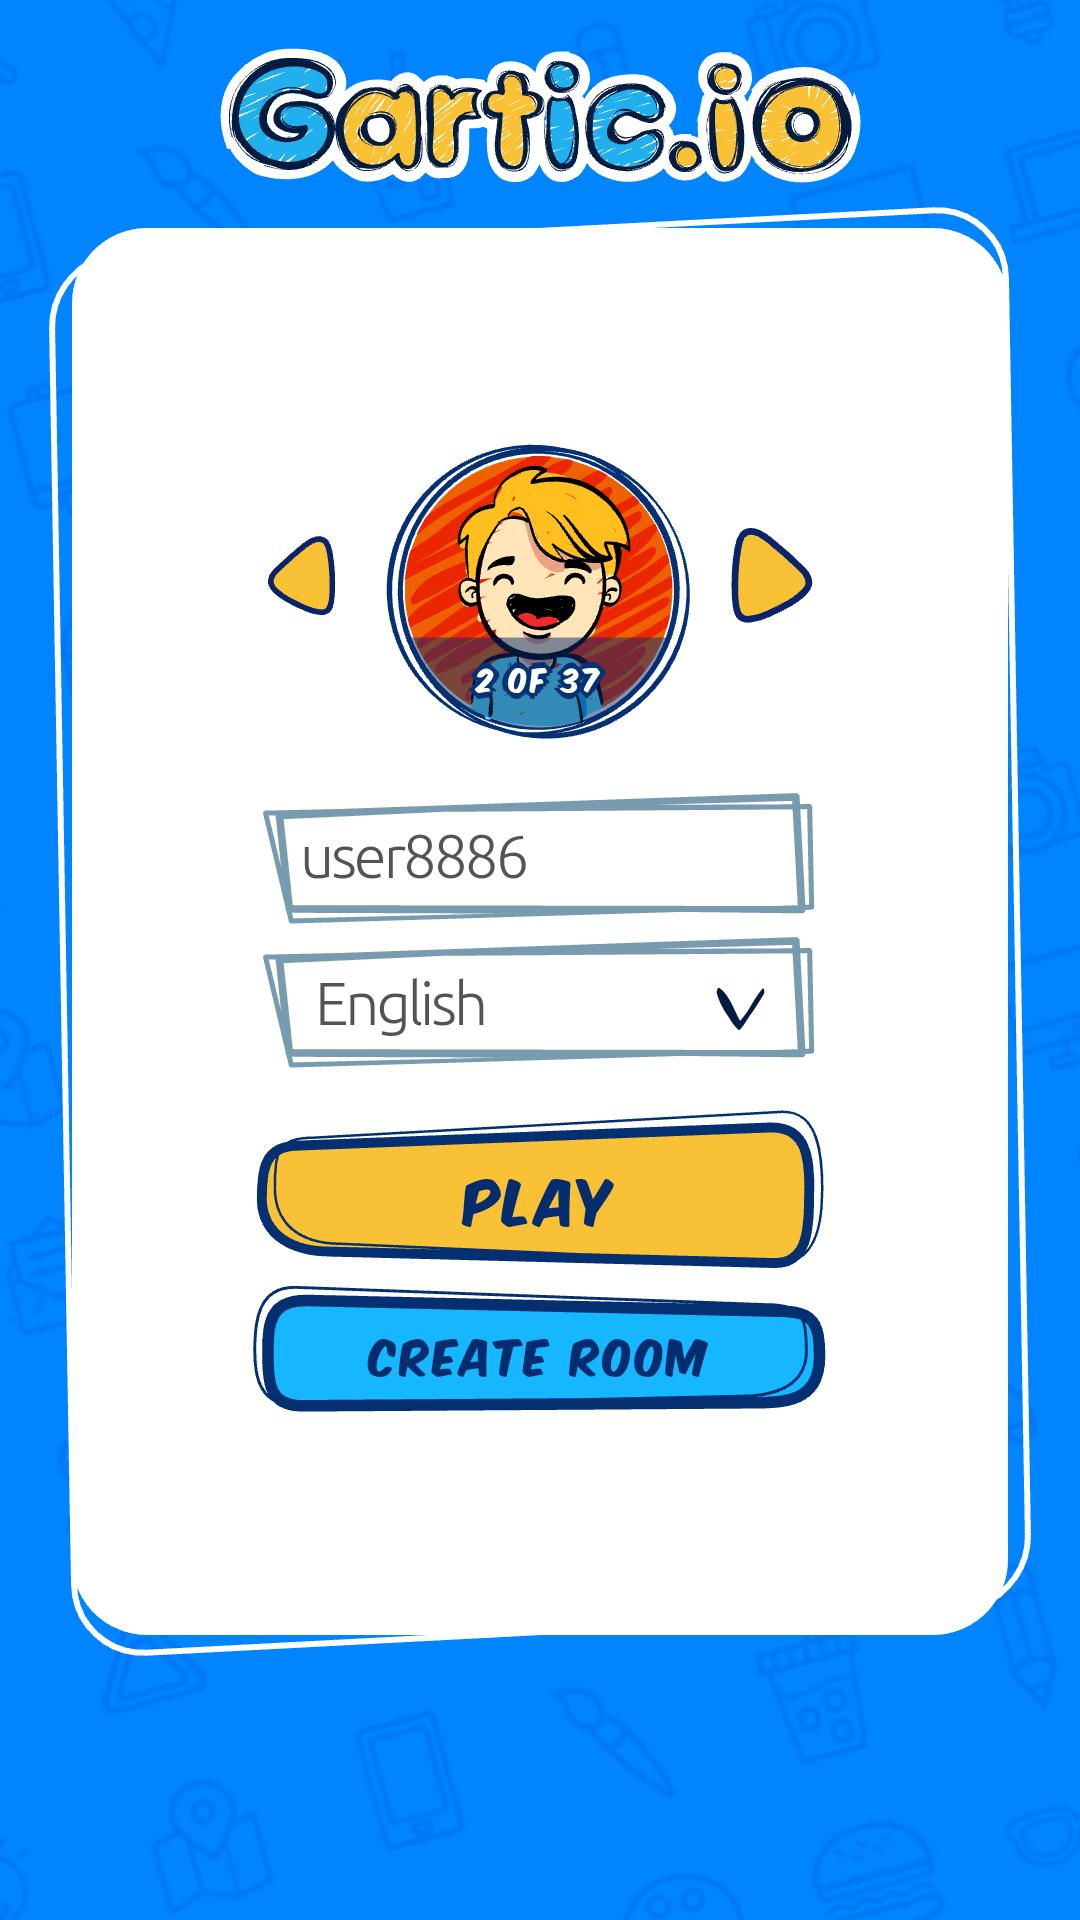 Draw & Guess - Gartic.io for Android - APK Download